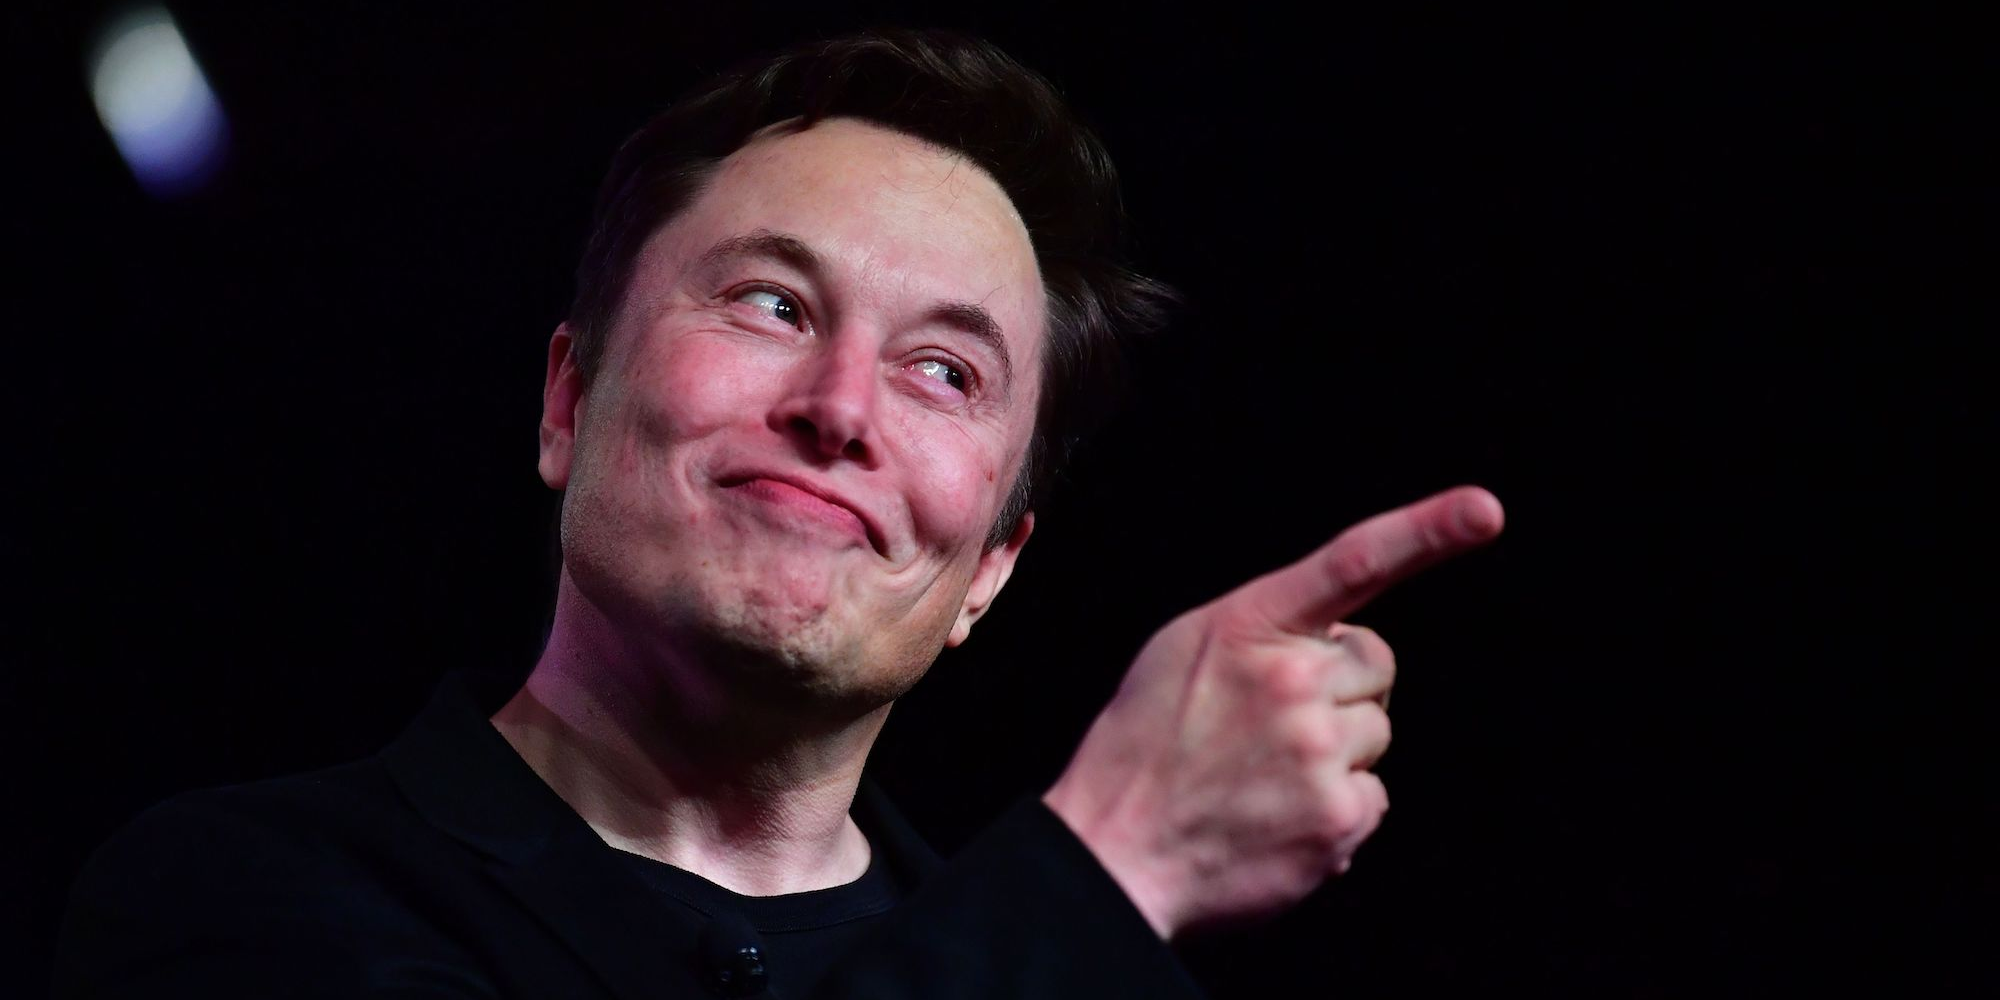 Elon Musk said his AI brain chips company could ‘solve’ autism and schizophrenia